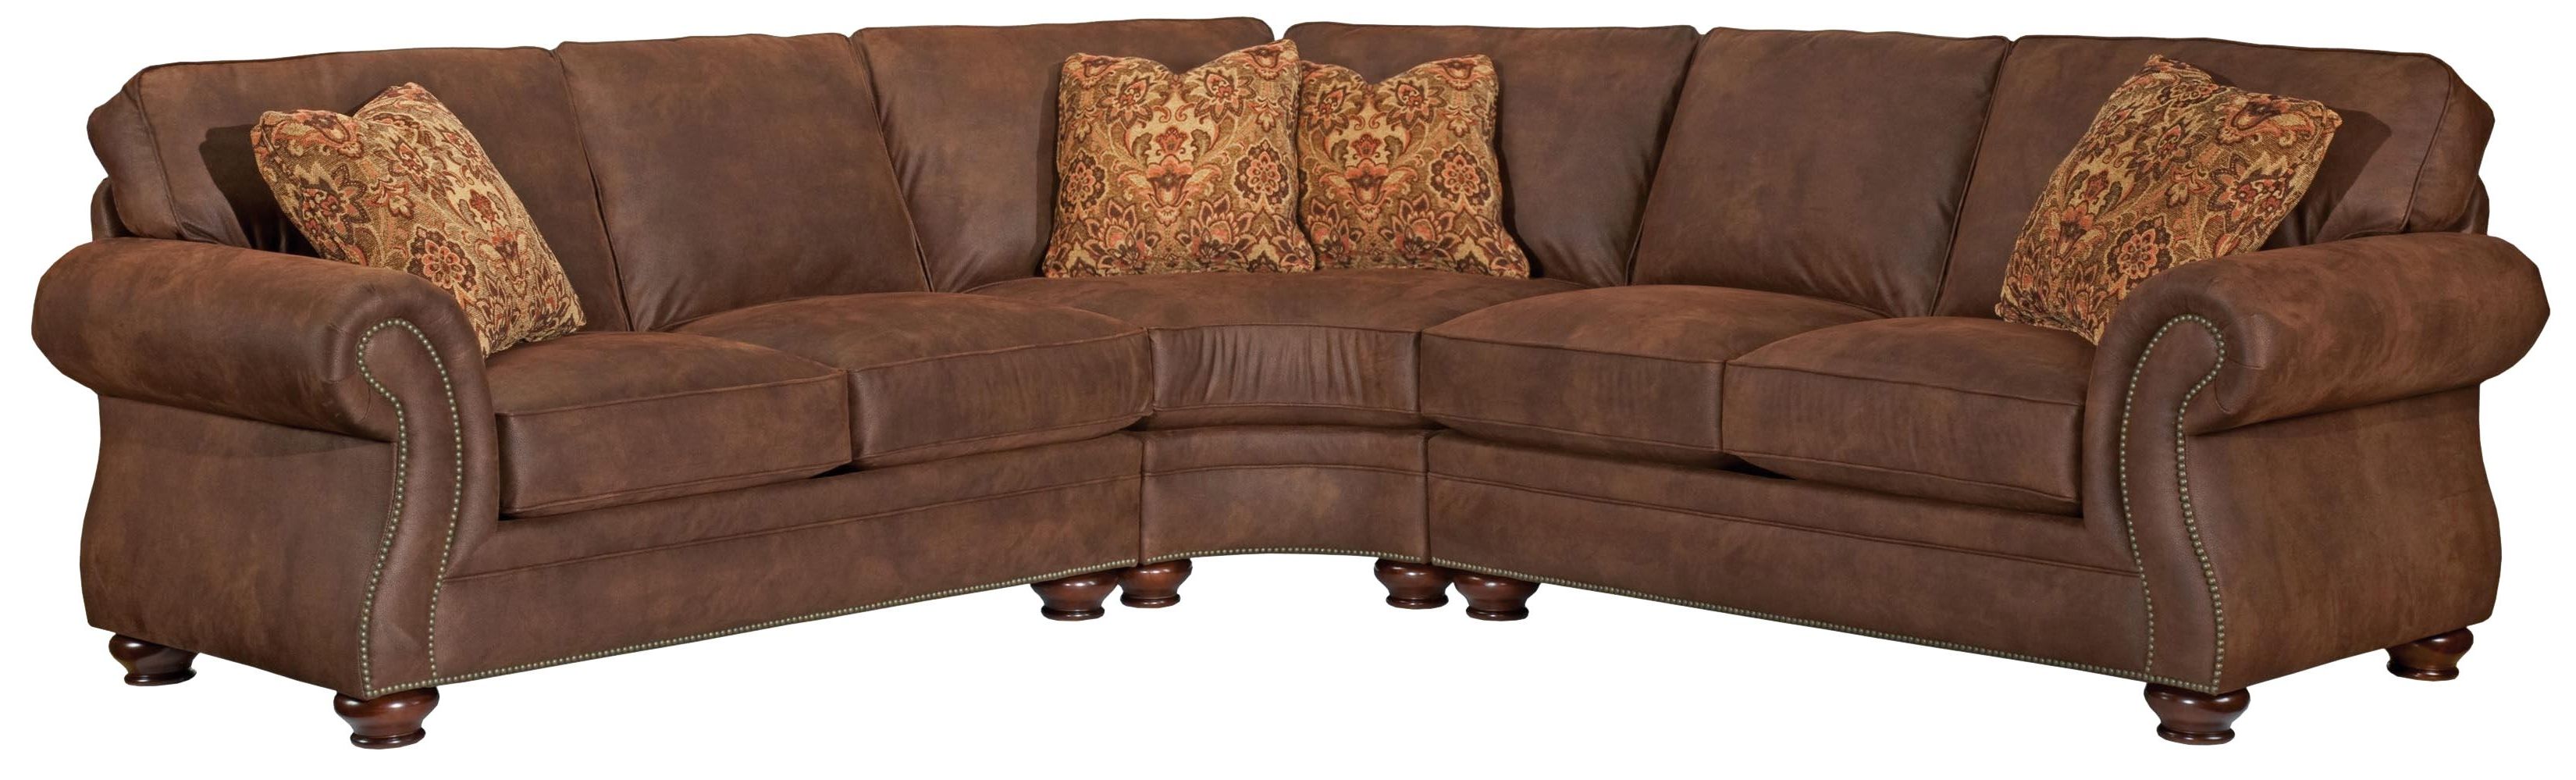 Sectional Sofas At Broyhill Intended For 2017 Broyhill Furniture Laramie 3 Piece Wedge Sectional Sofa (Photo 1 of 15)